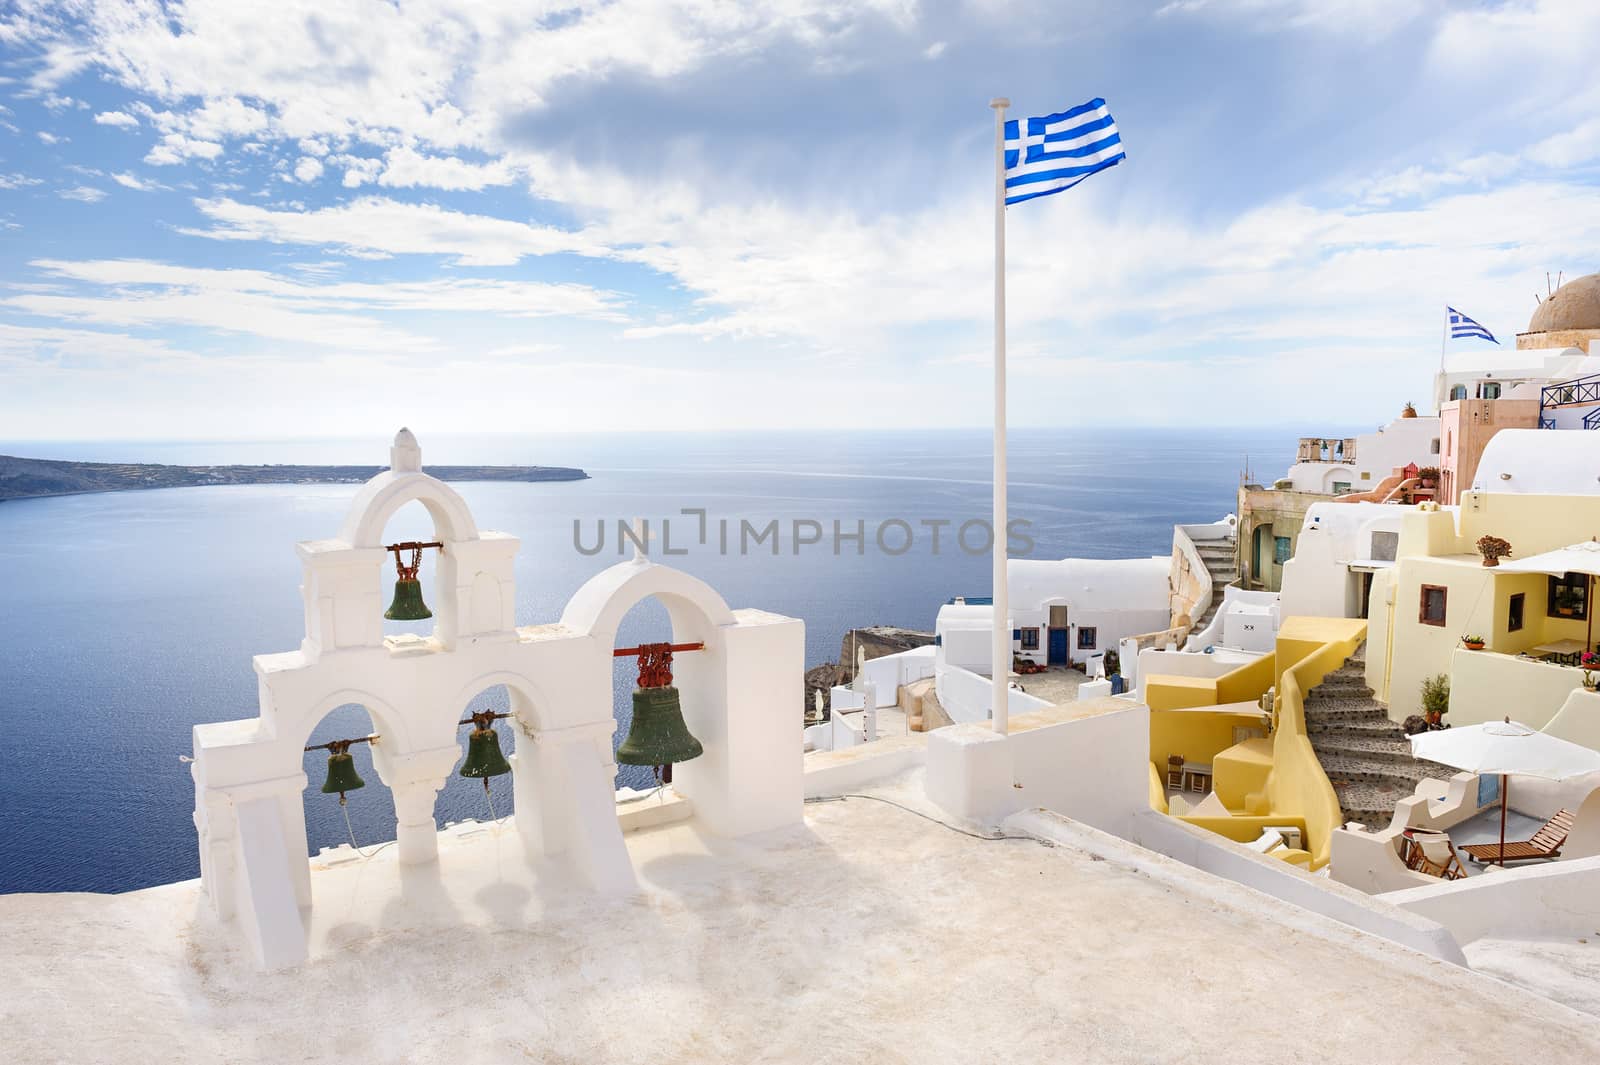 Oia view at Santorini, Greece by starush